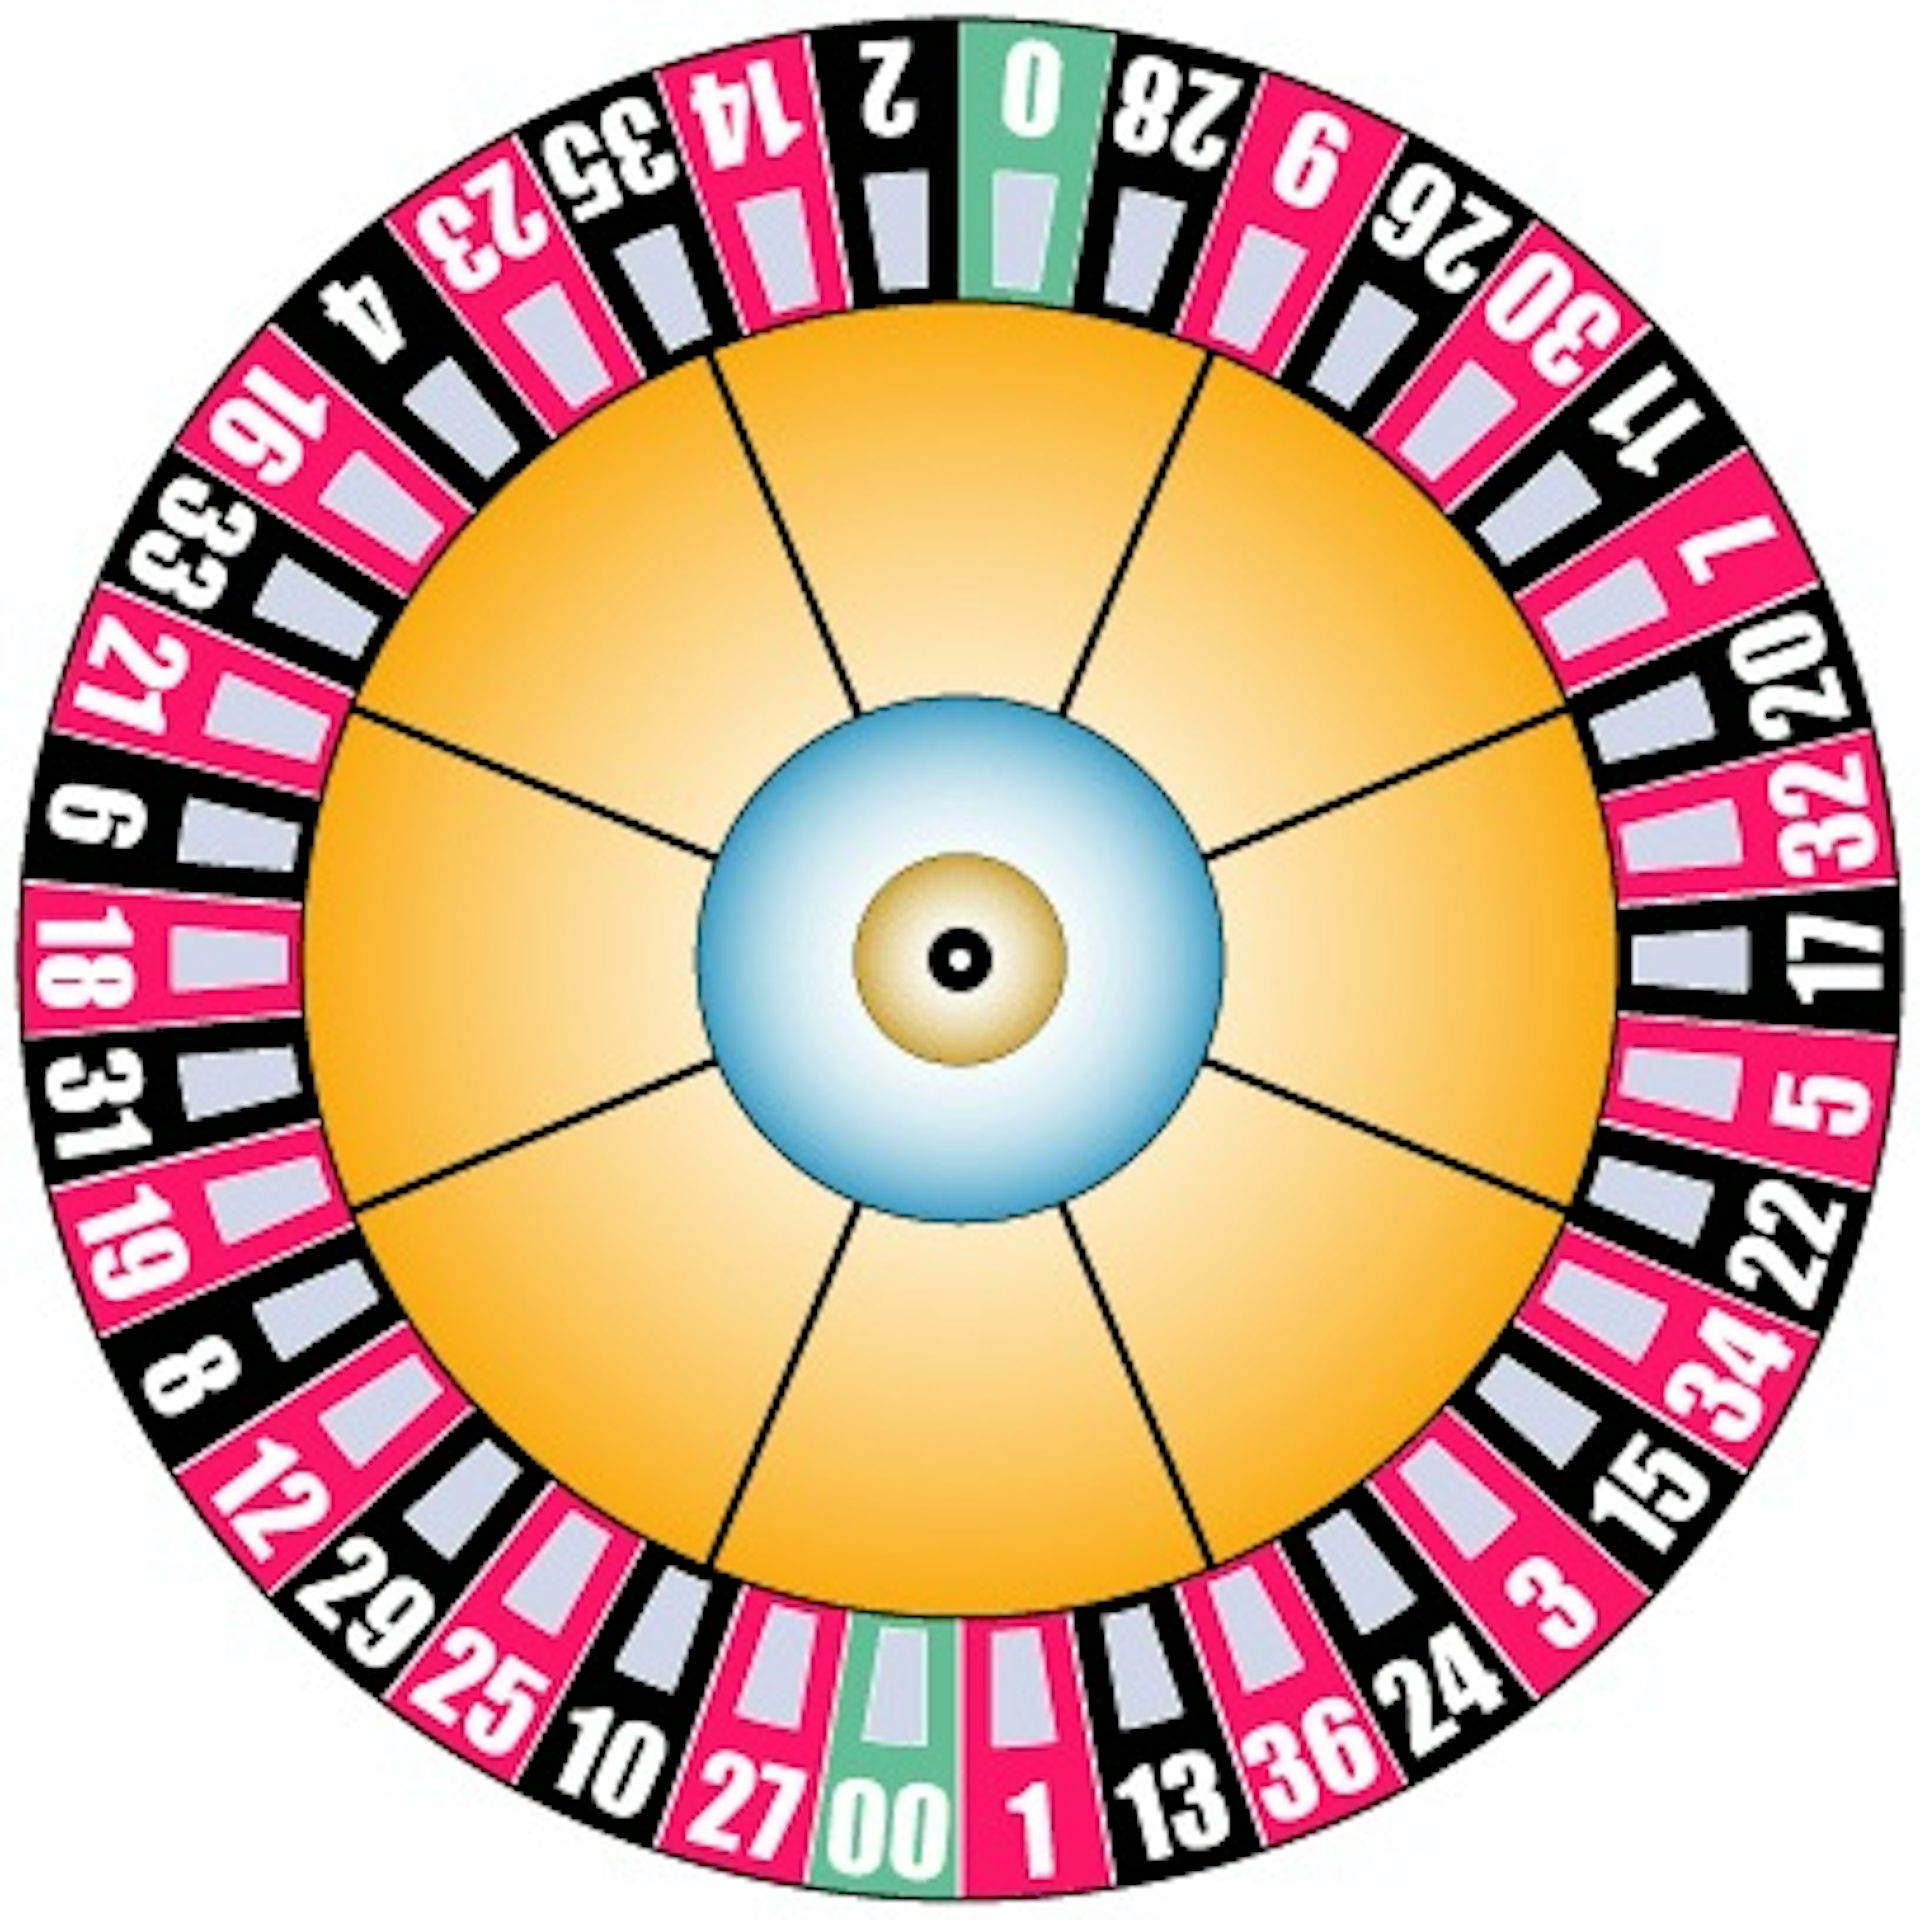 how to make money from roulette